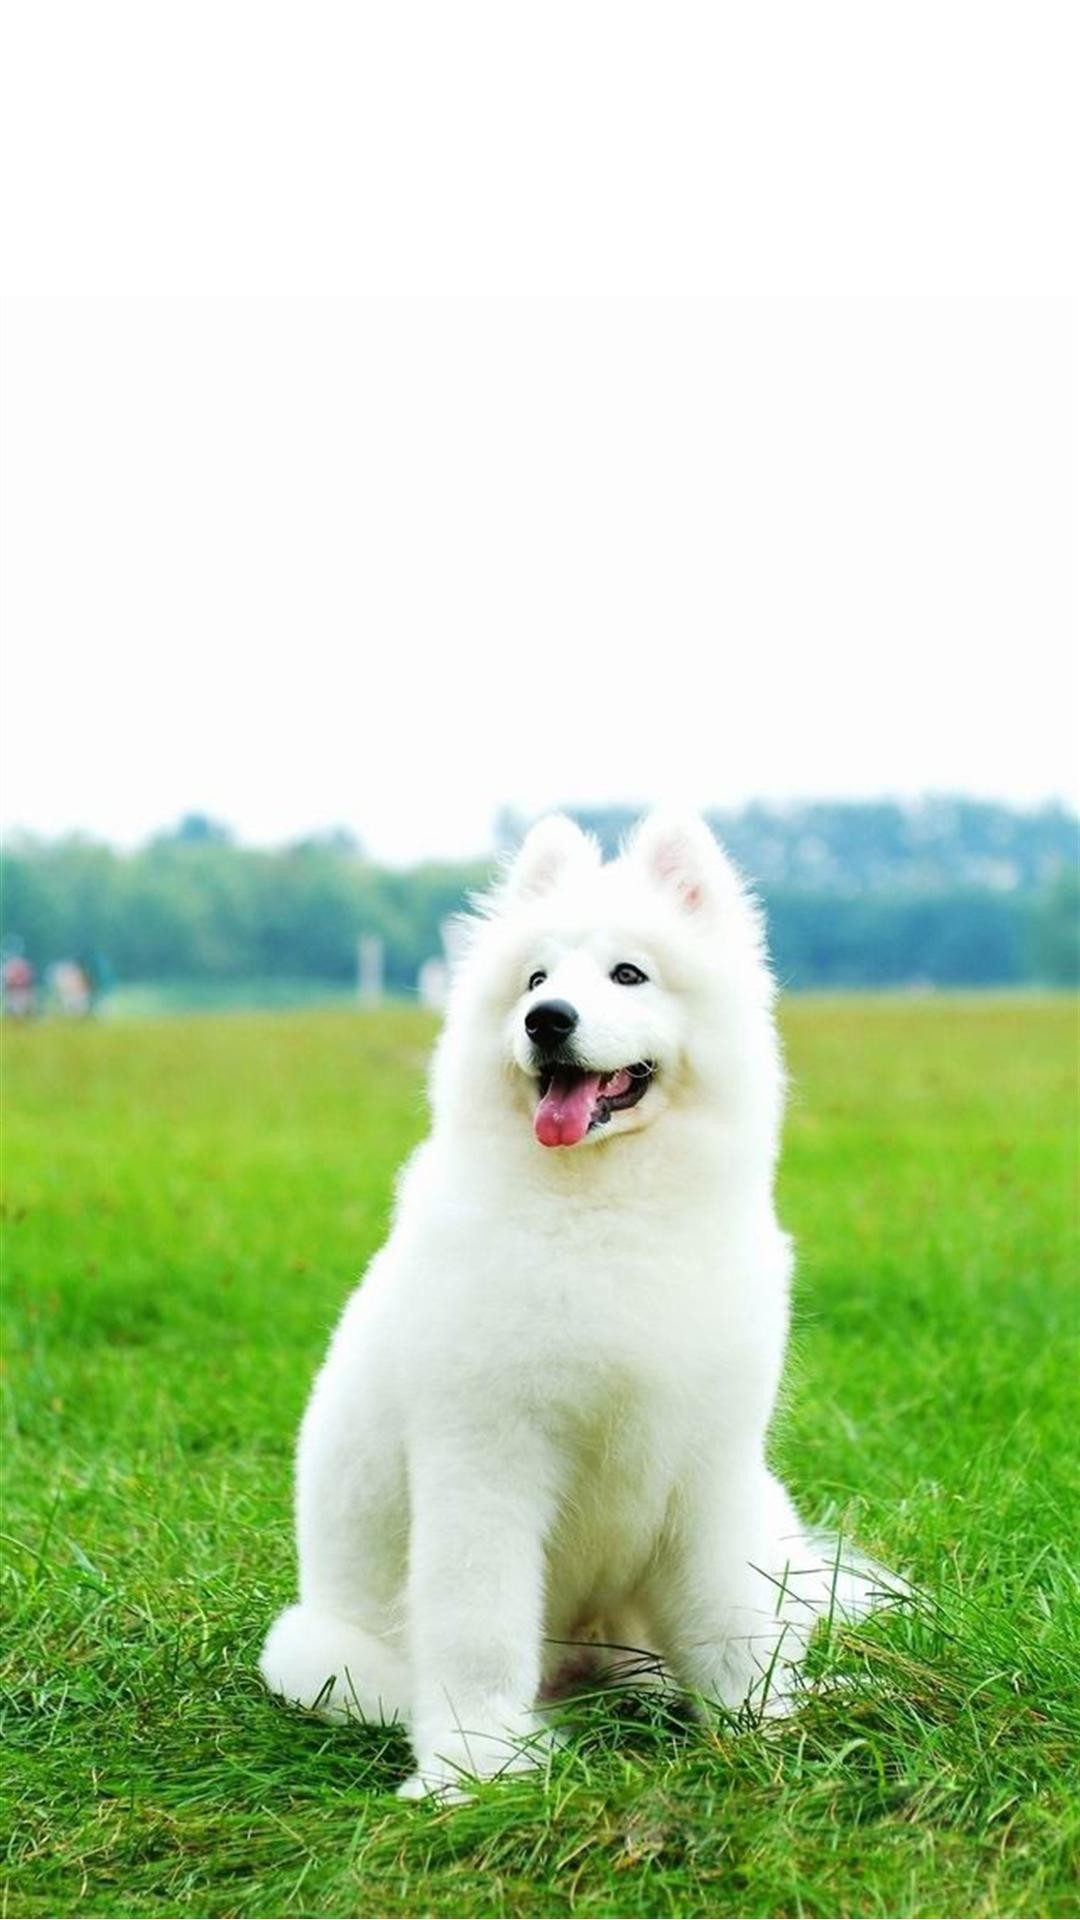 1080x1920 Cute white dog Galaxy Note 3 Wallpapers Galaxy Note 3 Wallpapers